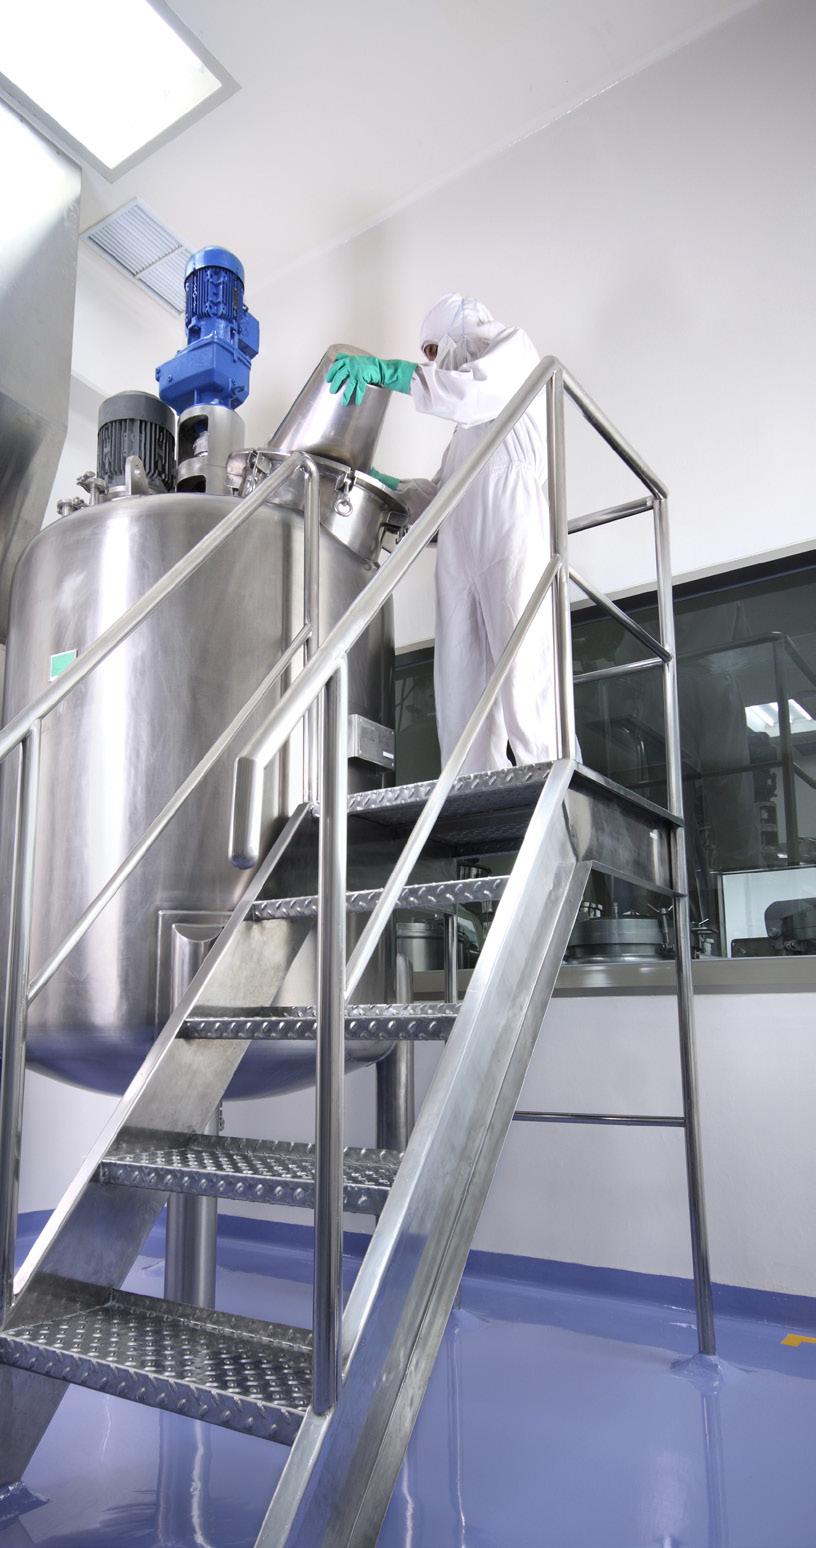 Reduce risk of cross contamination. Meet GMP and product quality requirements.